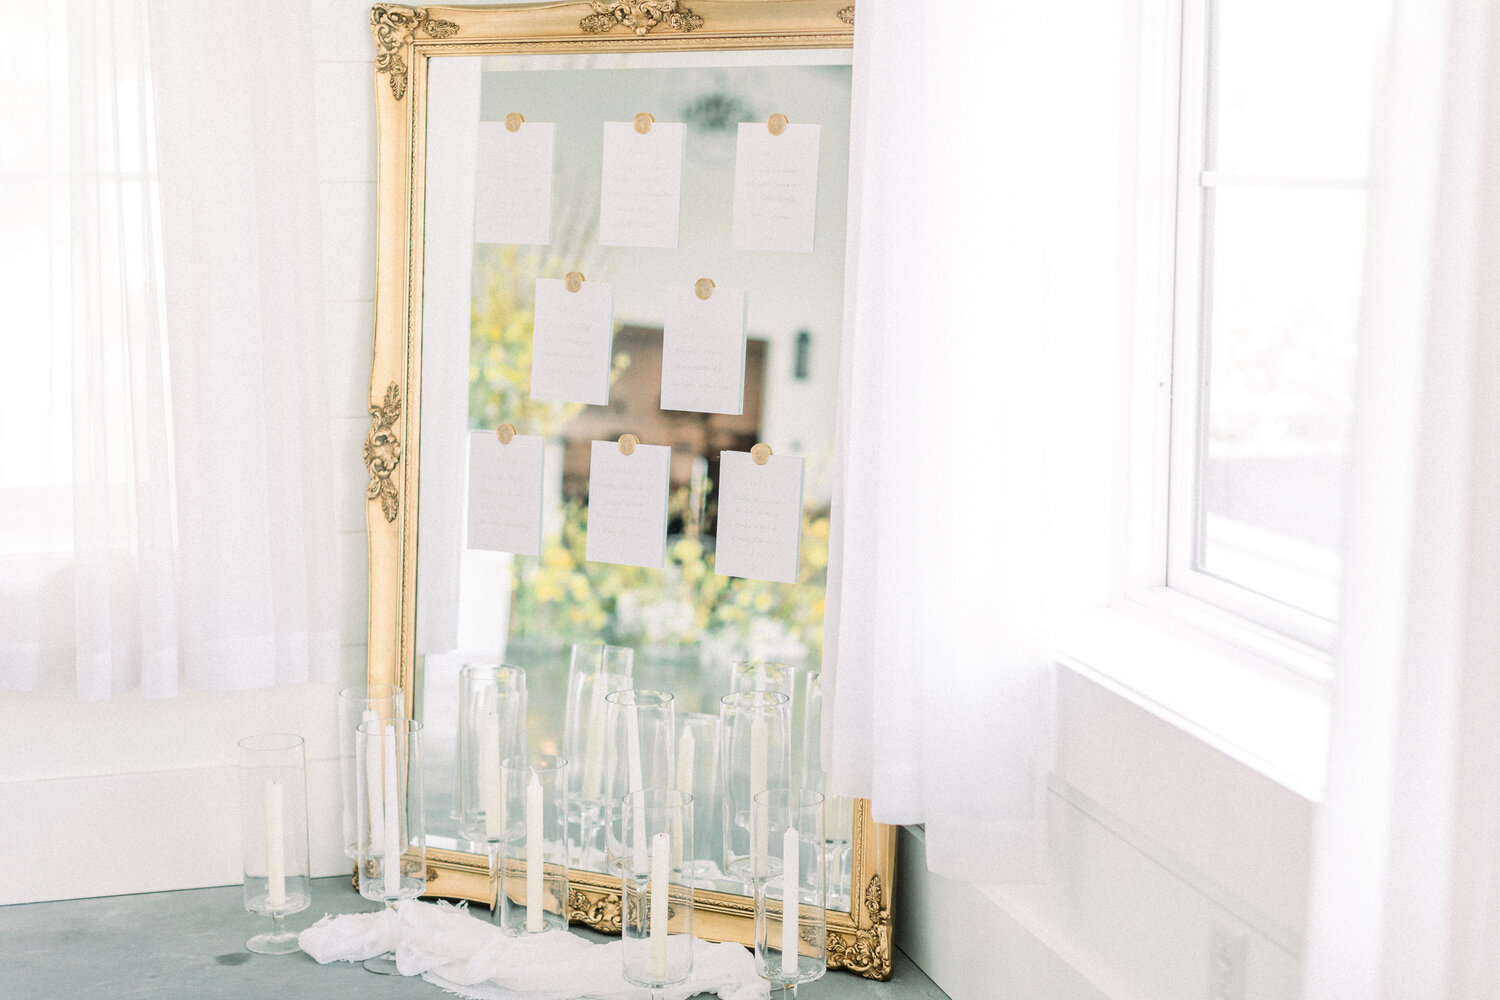 Summer wedding inspiration. Wedding table setting cards placed on mirror.